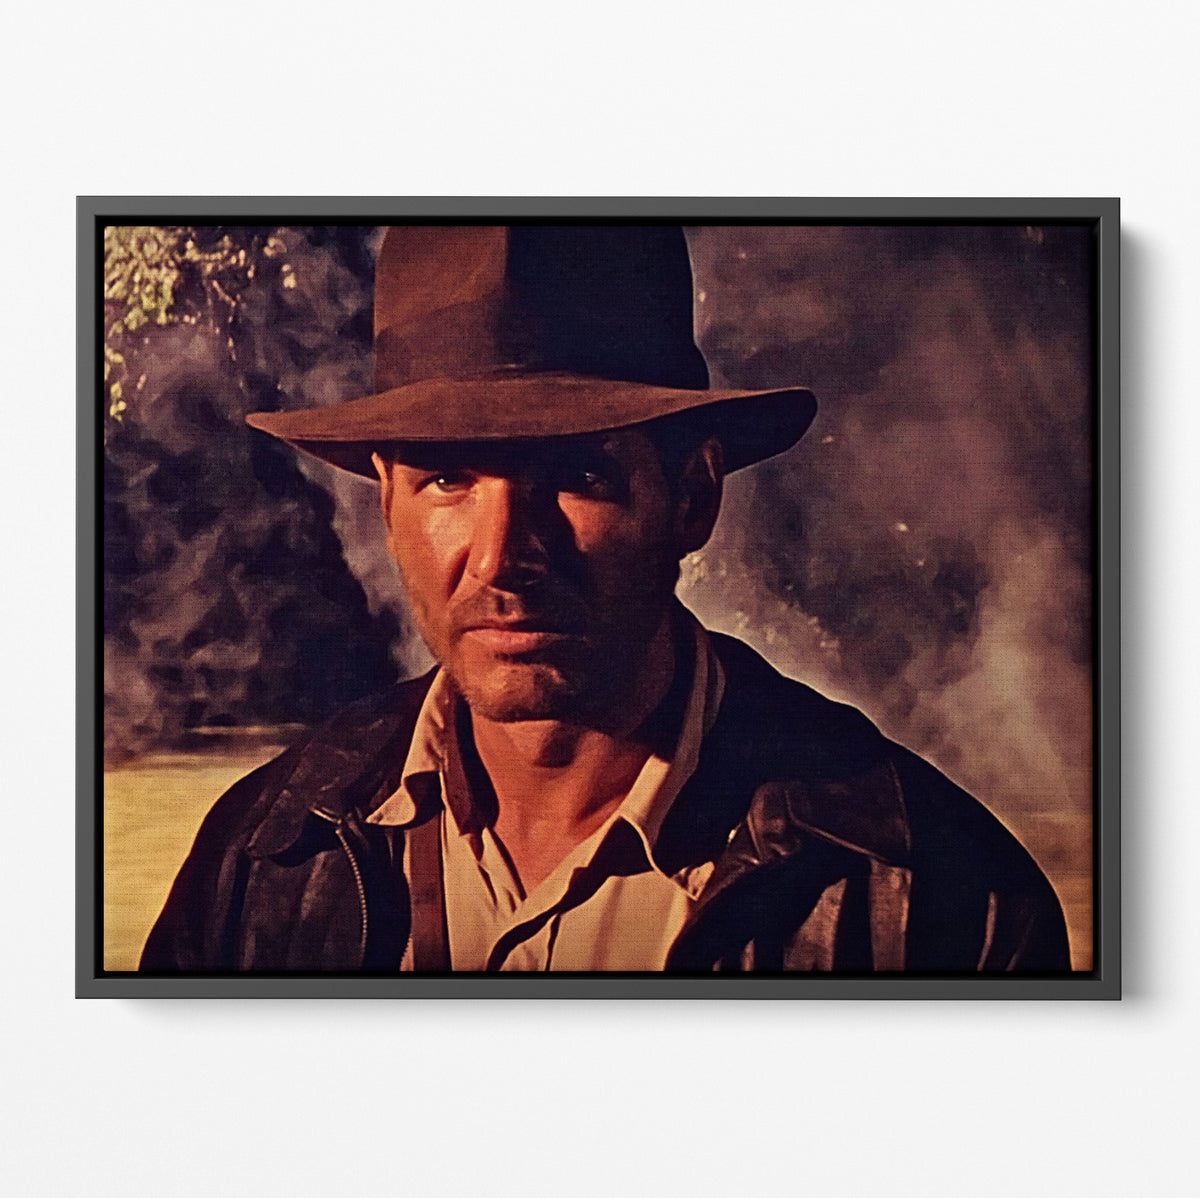 Indiana Jones Reveal Poster/Canvas | Far Out Art 